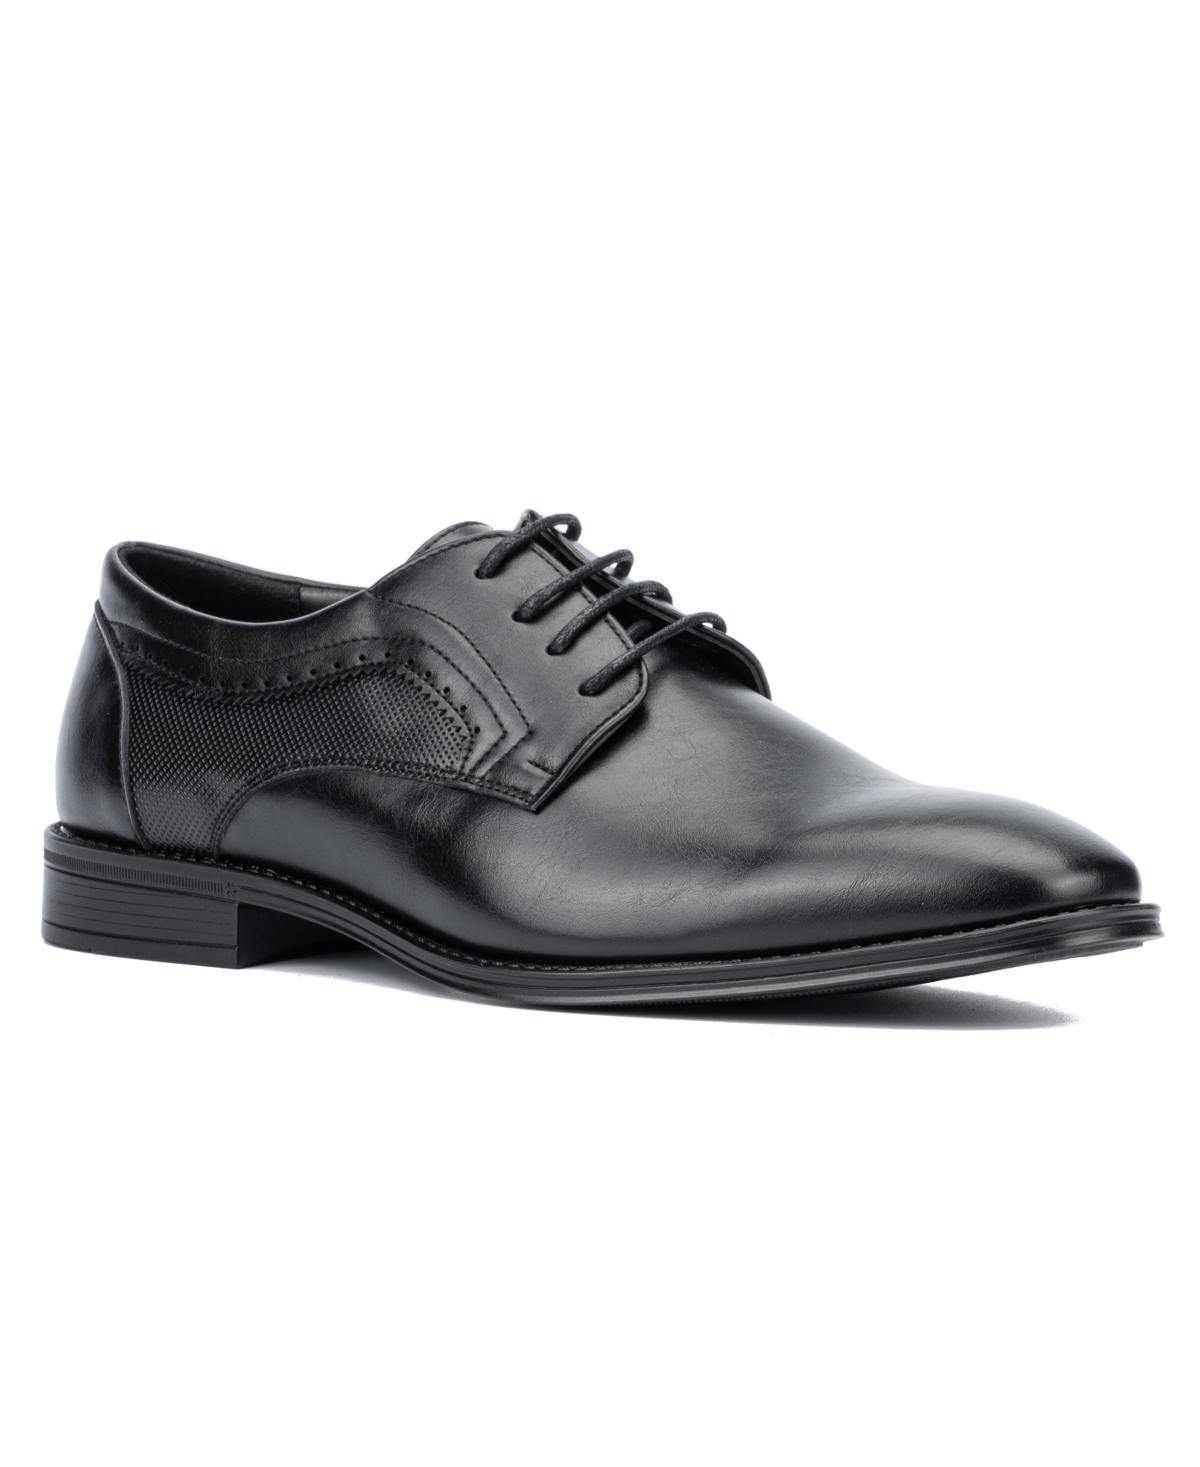 X-ray Men's Apollo Lace-up Oxford Shoes In Black